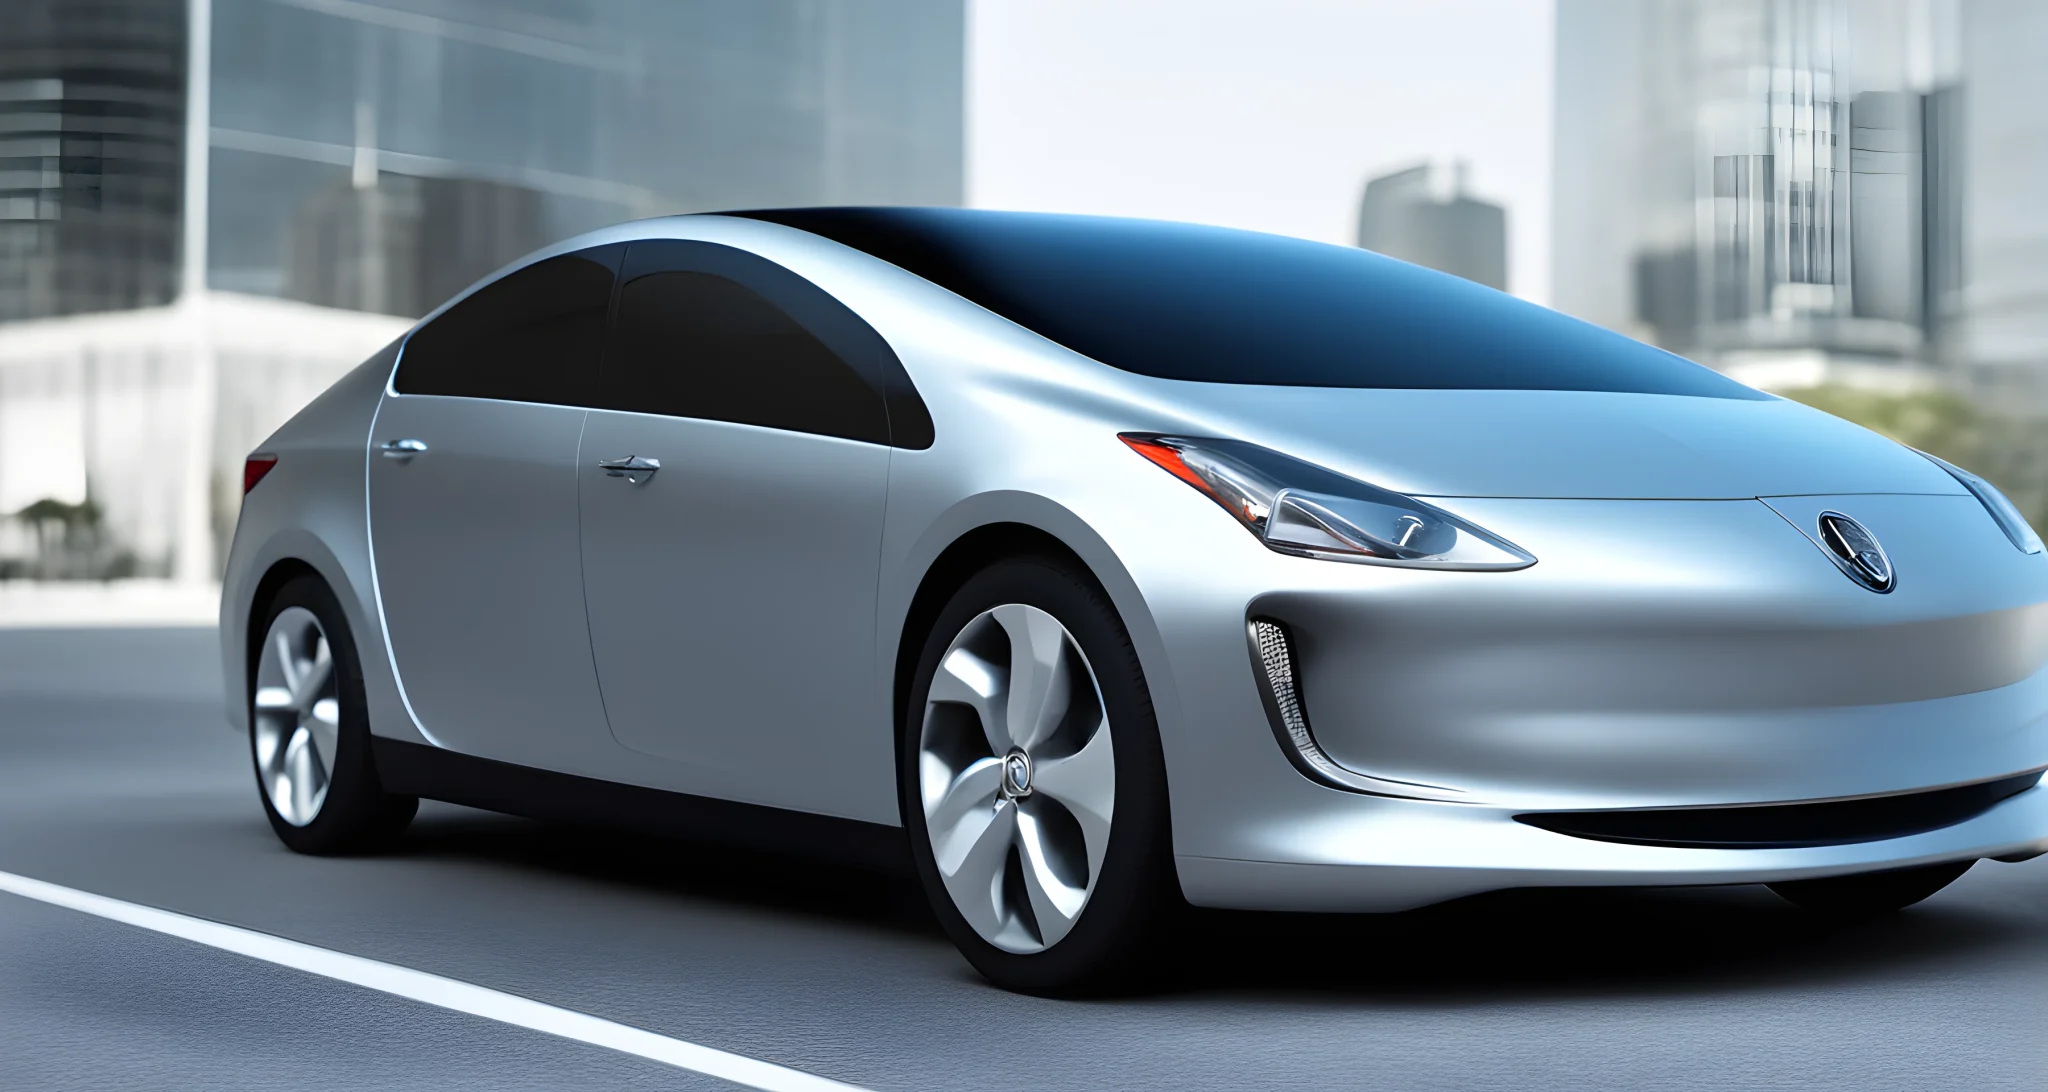 The image features a sleek, modern hybrid car with advanced fuel efficiency technologies.